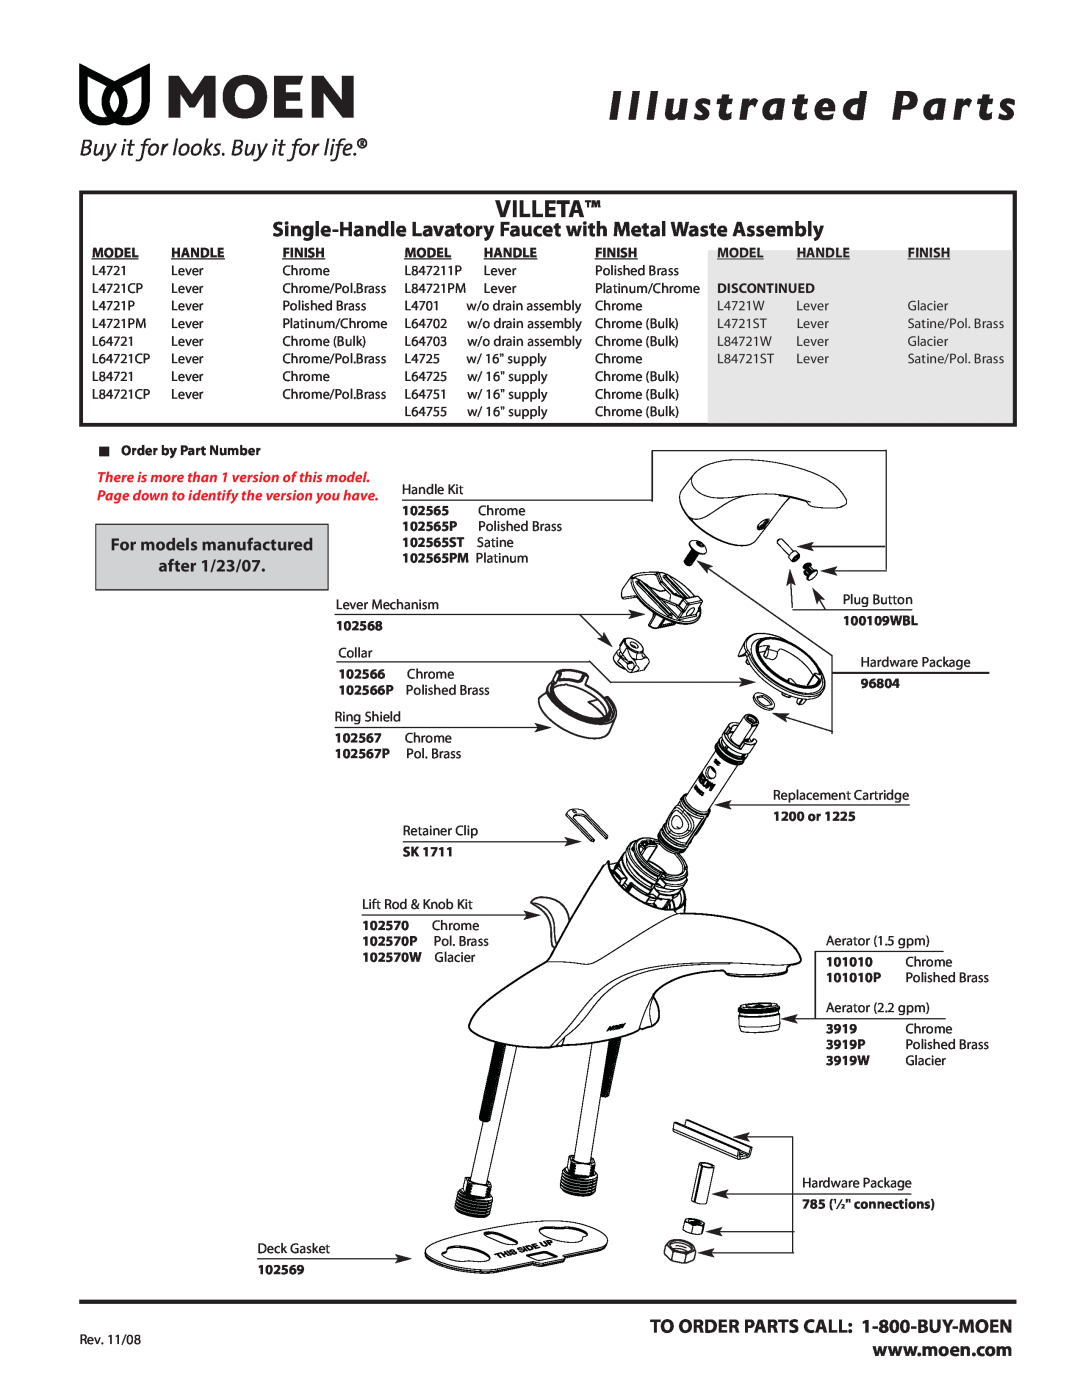 Moen L4721 manual Illustrated Par ts, Single-Handle Lavatory Faucet with Metal Waste Assembly, Villeta, after 1/23/07 